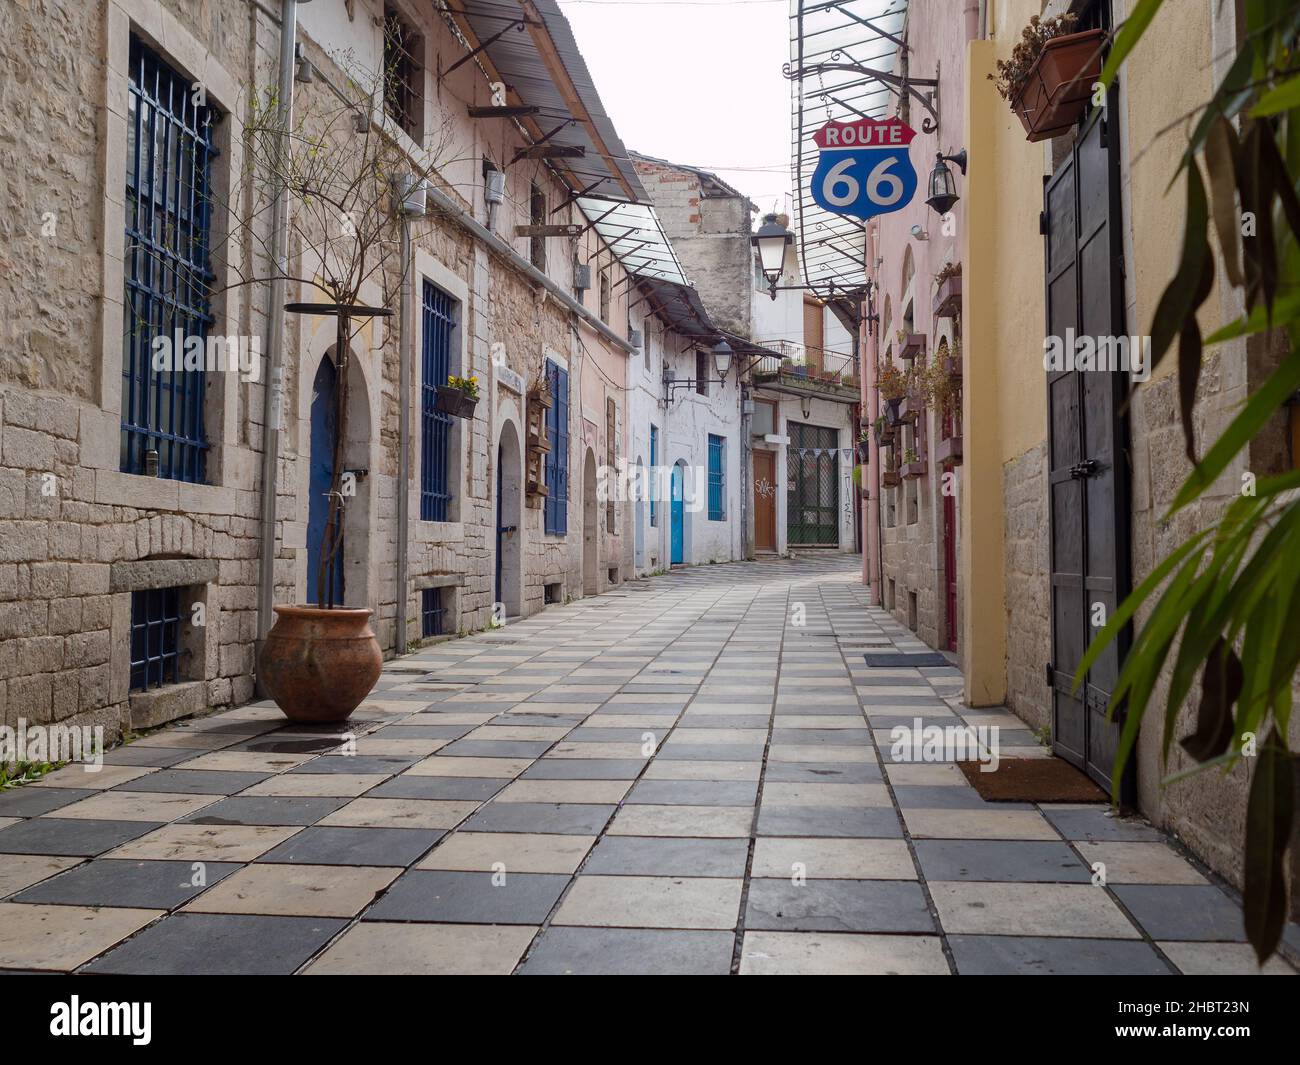 IOANNINA, GREECE - FEBRUARY 19, 2018: Street with shops of Ioannina city in the afternoon, Epirus Greece Stock Photo